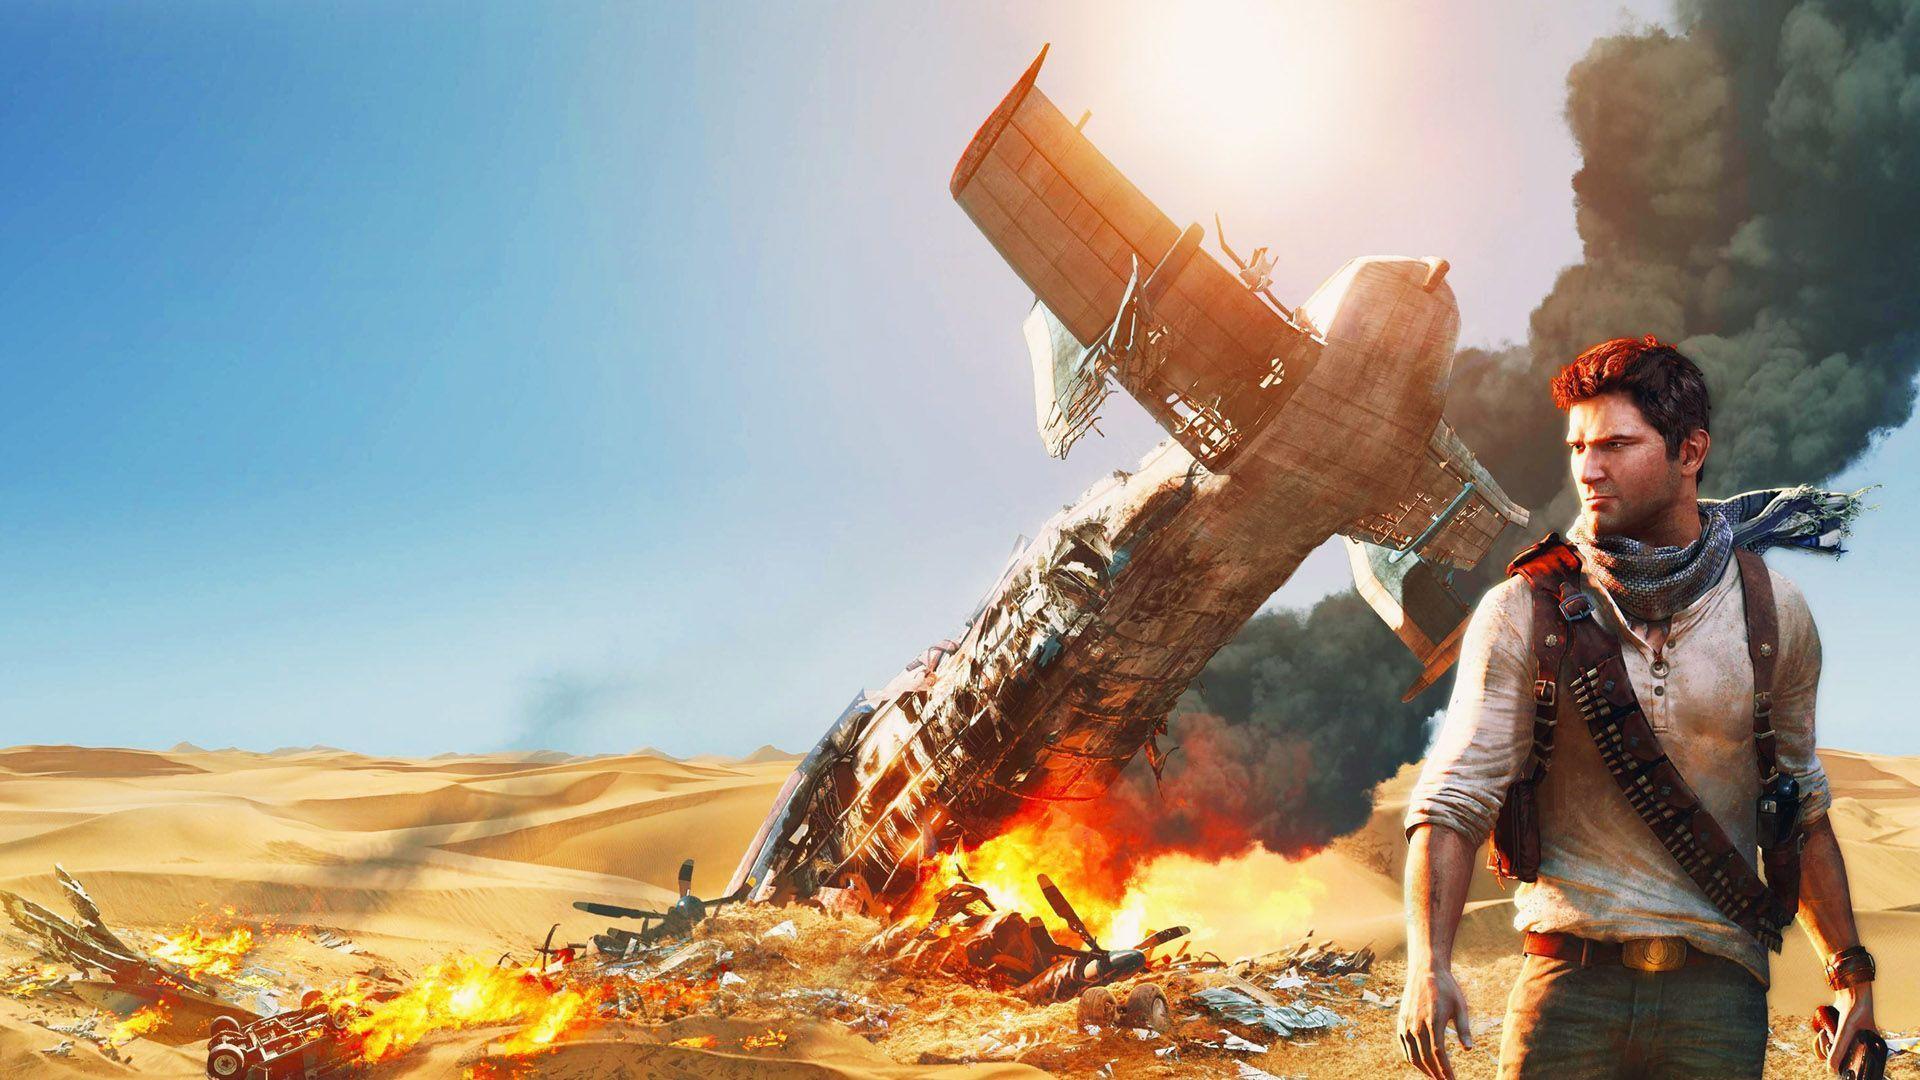 Awesome Uncharted Wallpaper 28433 1920x1080 px HDWallSource